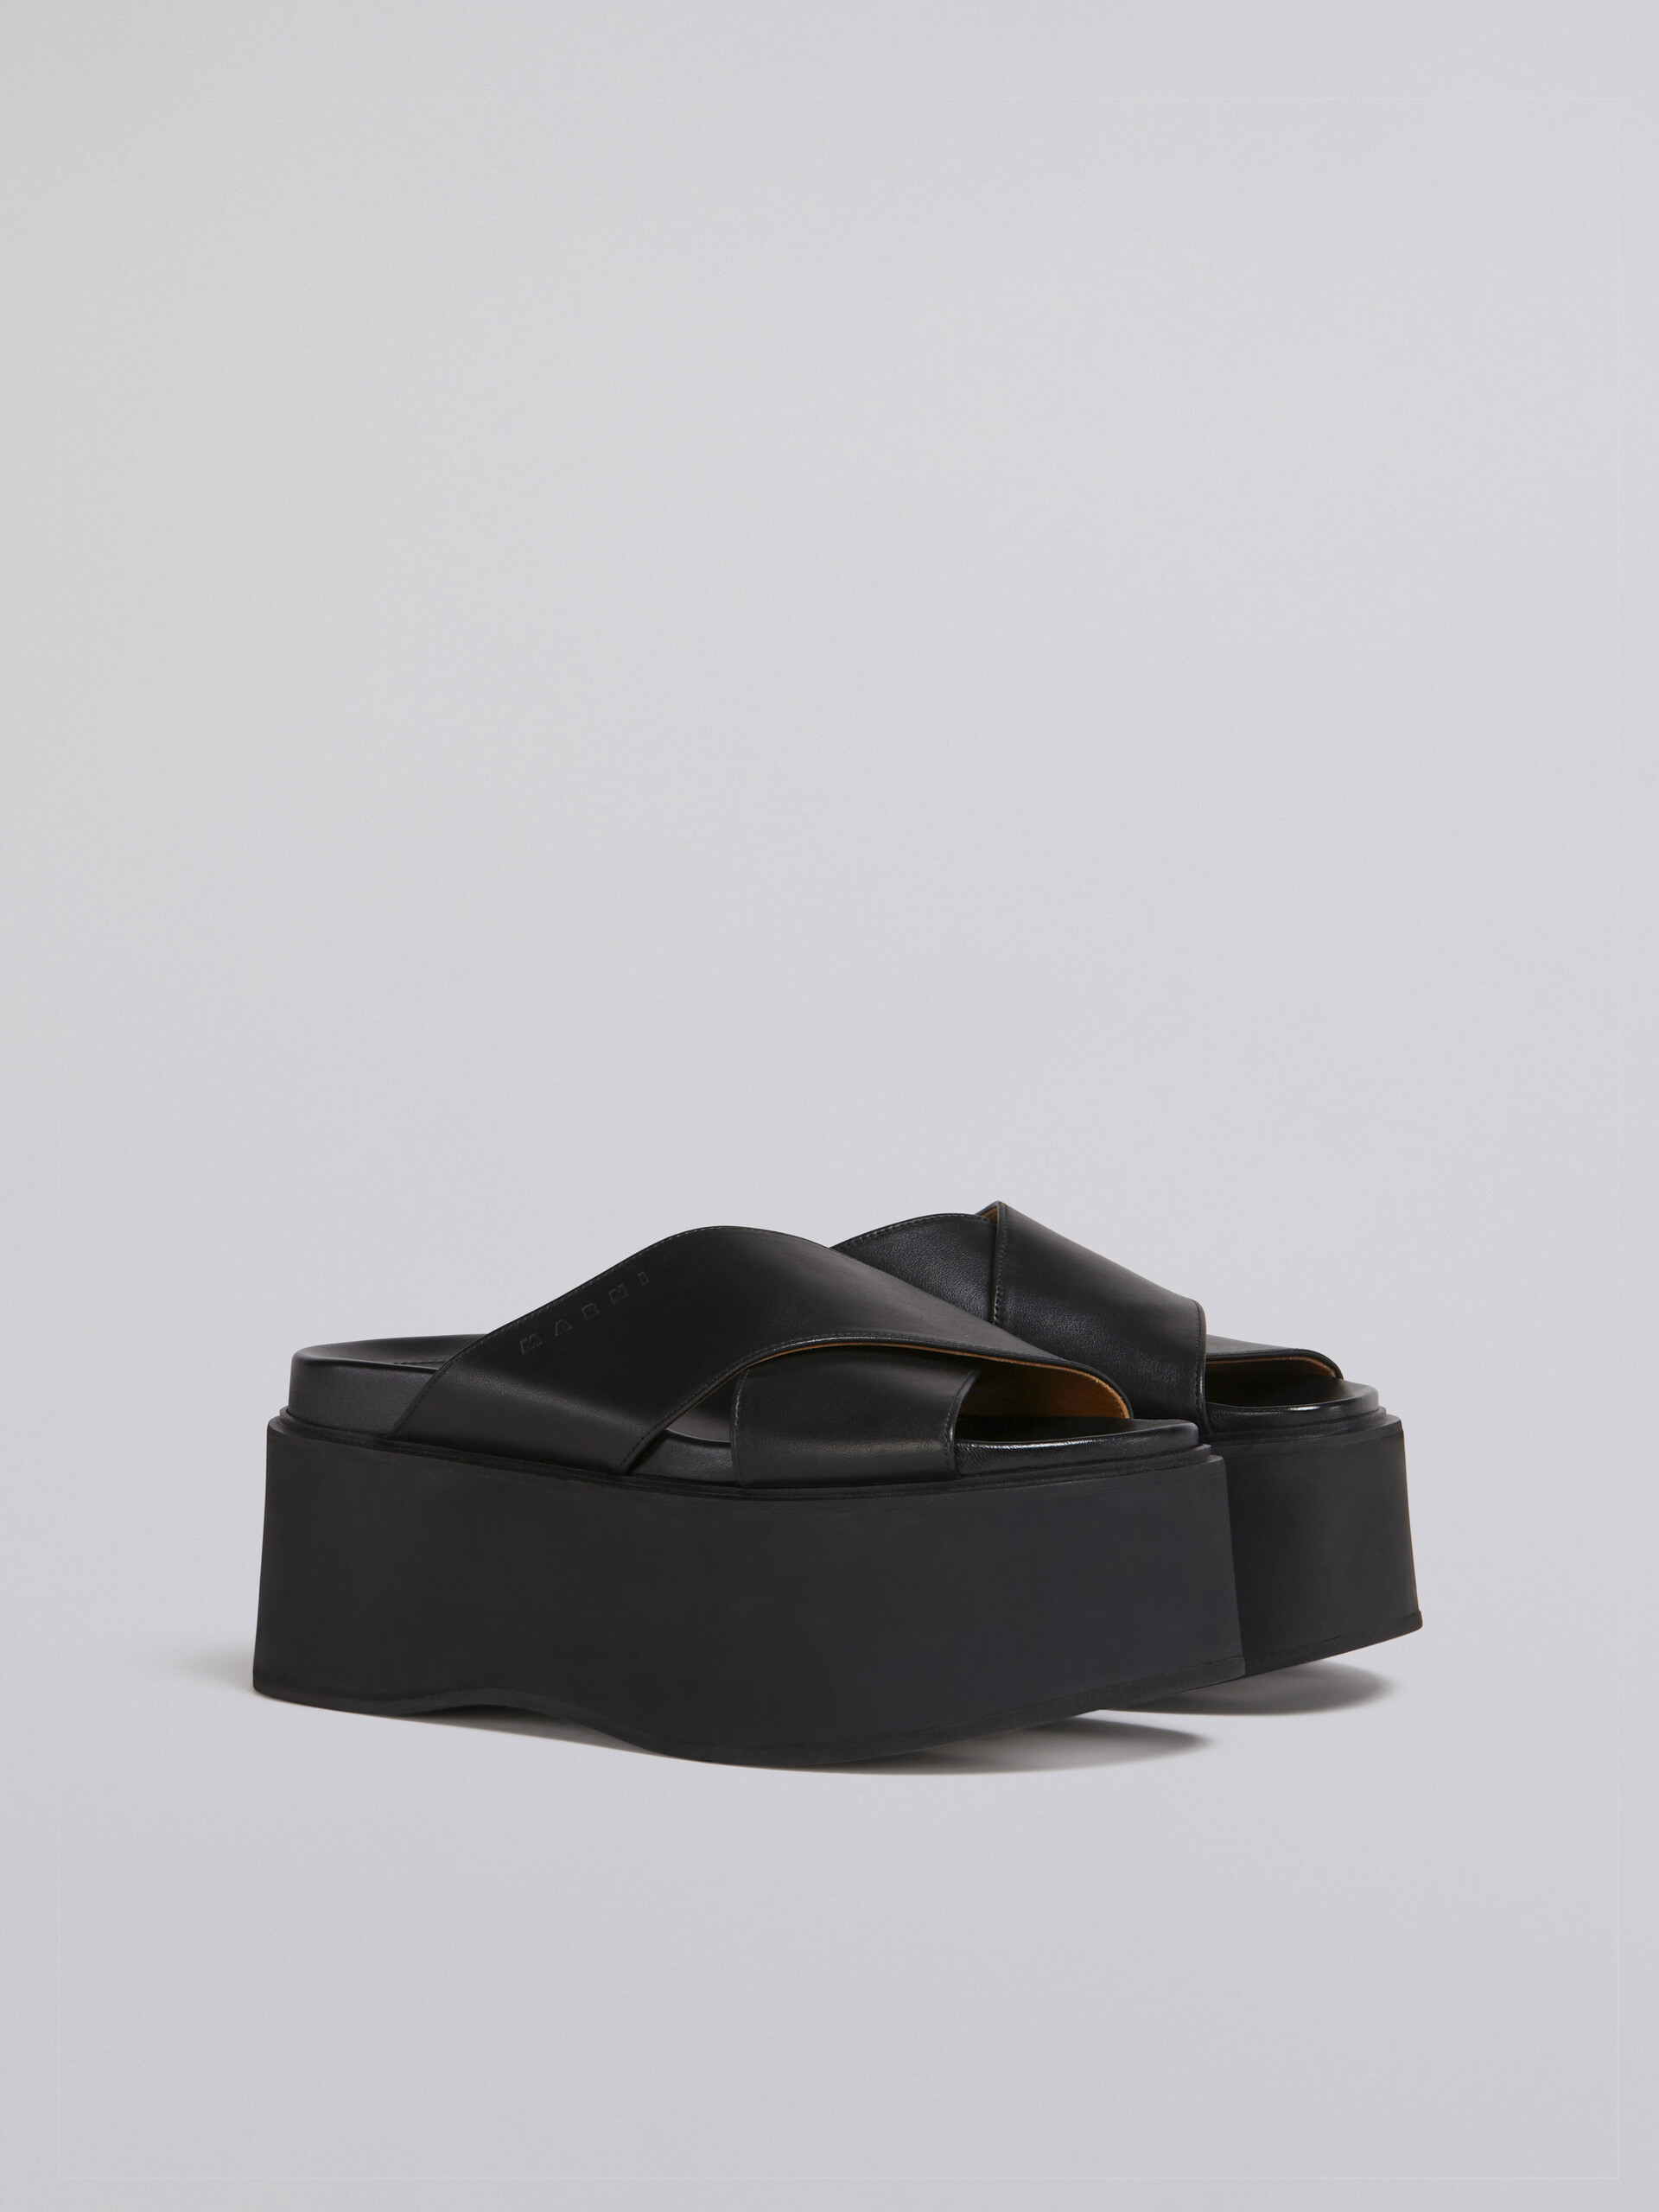 Criss-cross wedge in black calf leather - Sandals - Image 2